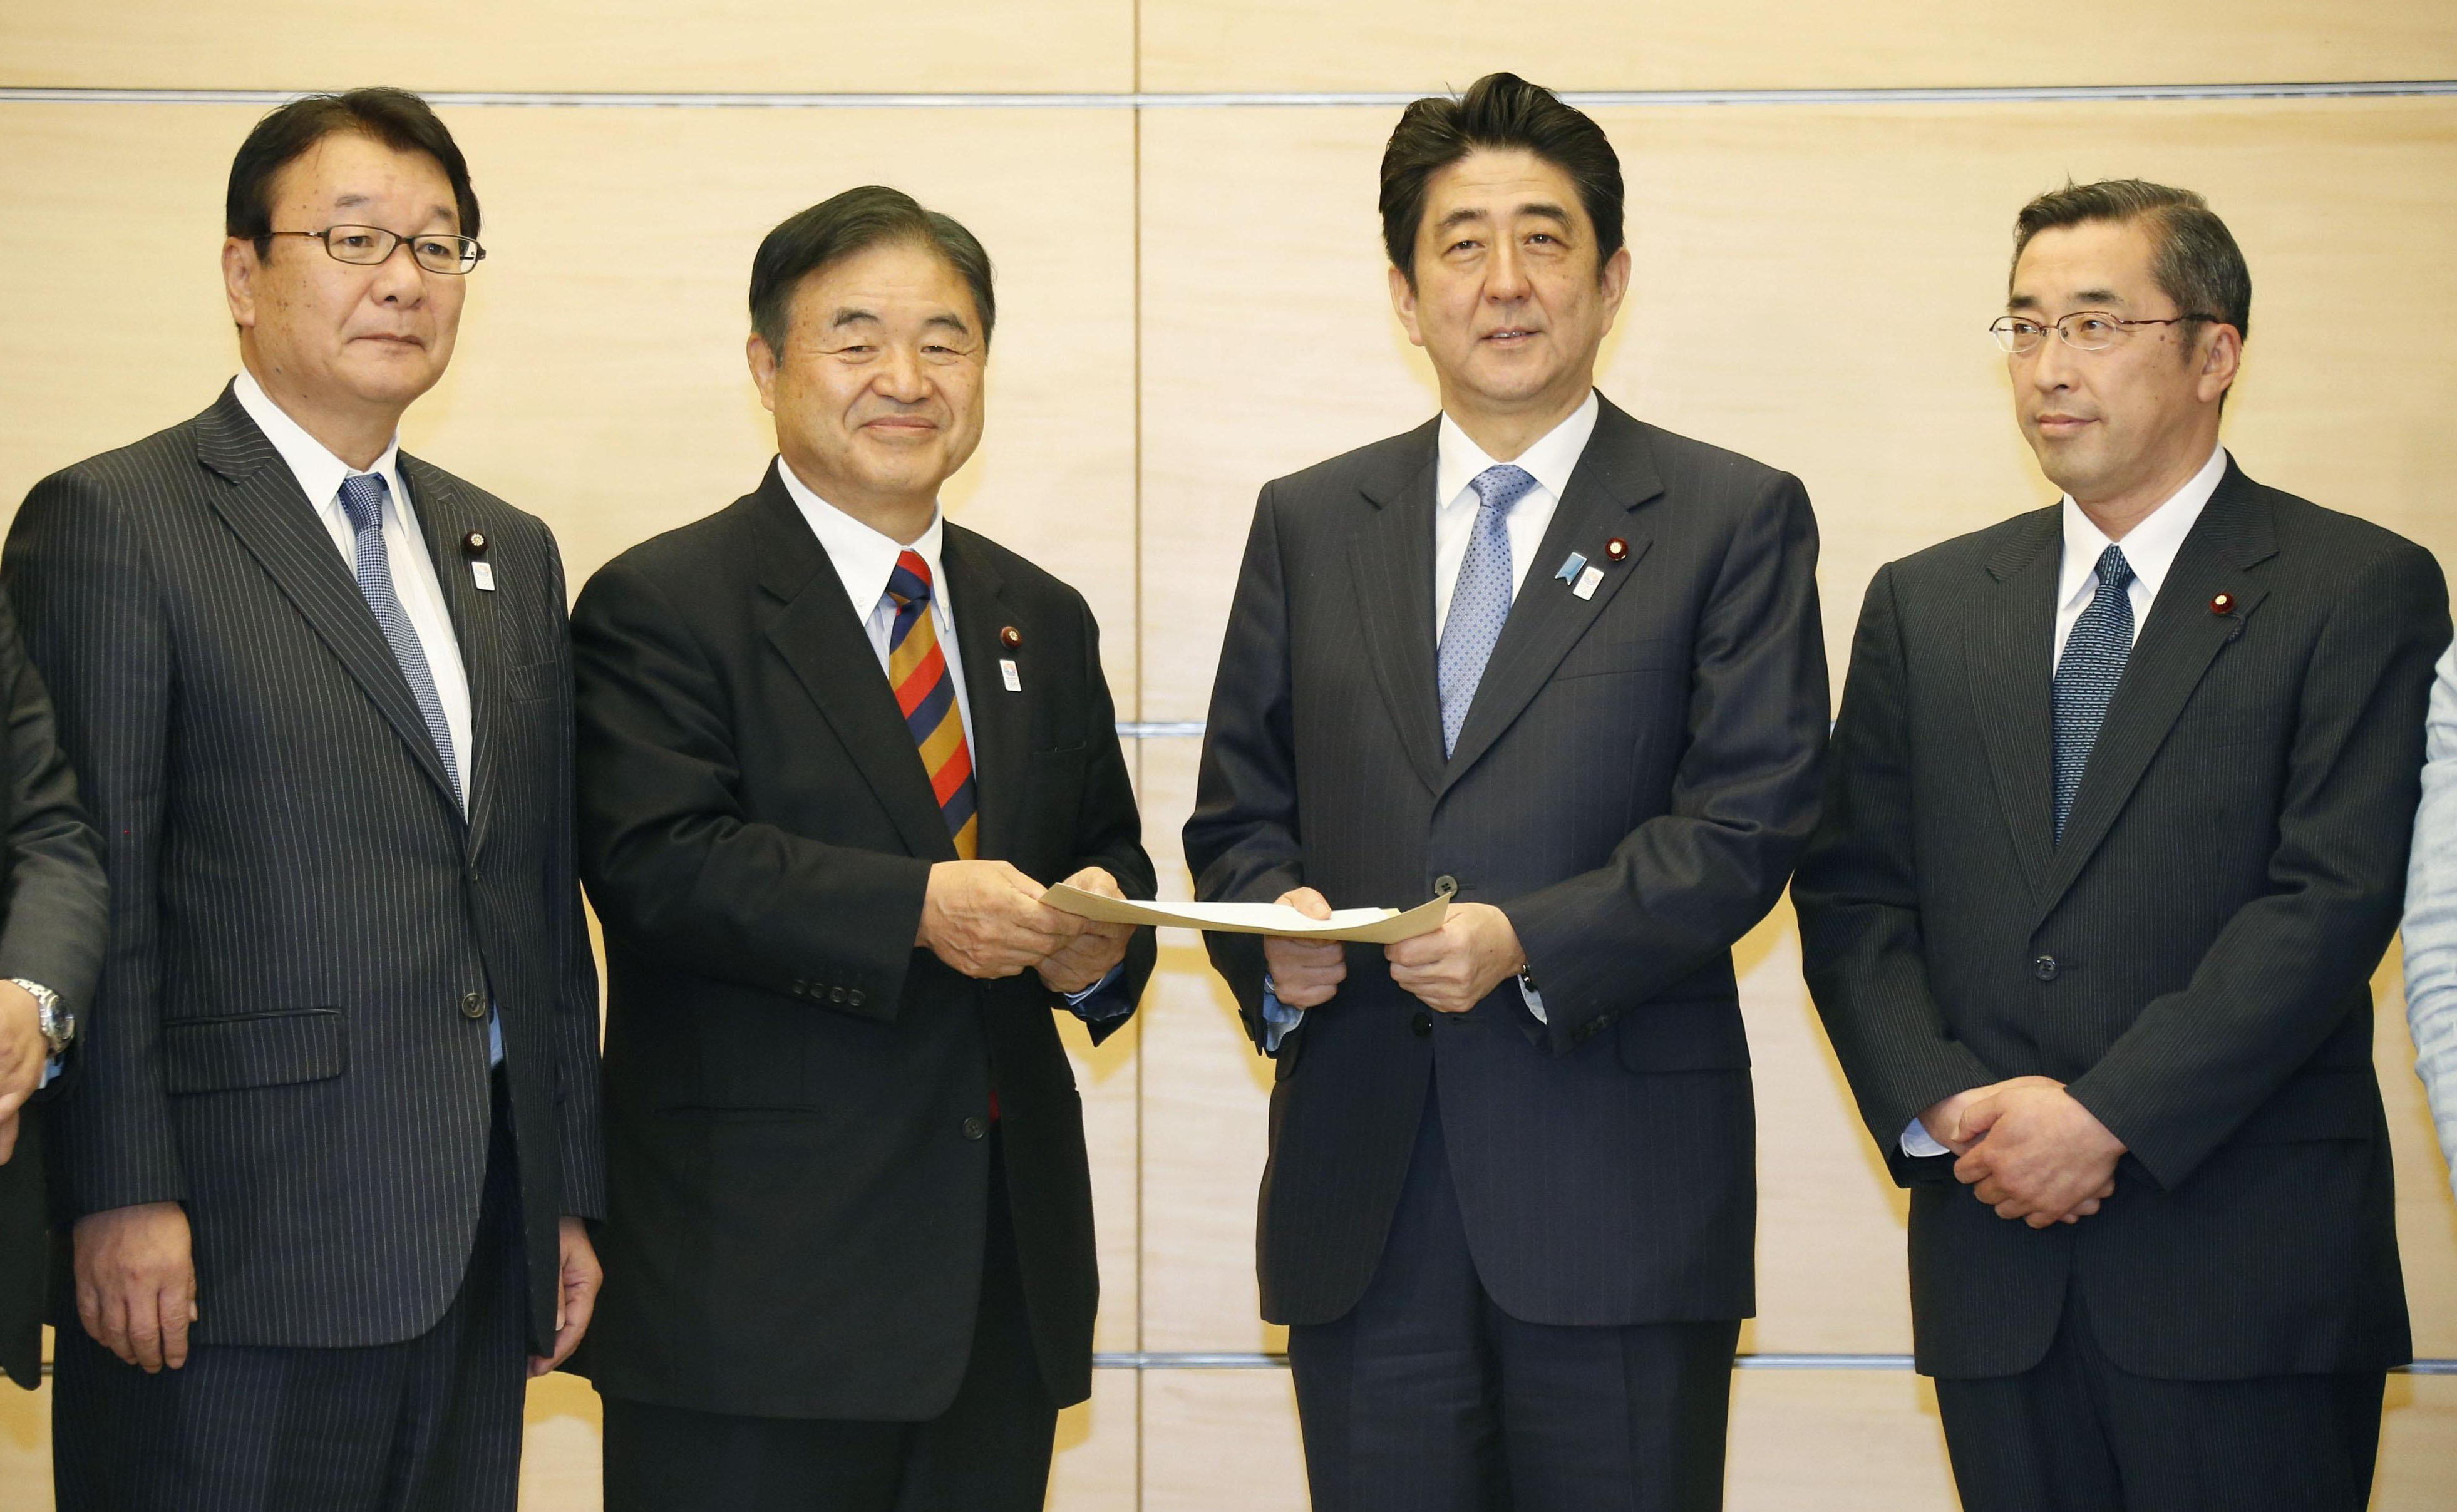 Accepted: Prime Minister Shinzo Abe (second from right) receives a set of education reform proposals from Toshiaki Endo (second from left), head of the ruling Liberal Democratic Party's education panel, on Monday at Abe's office in Tokyo. | KYODO